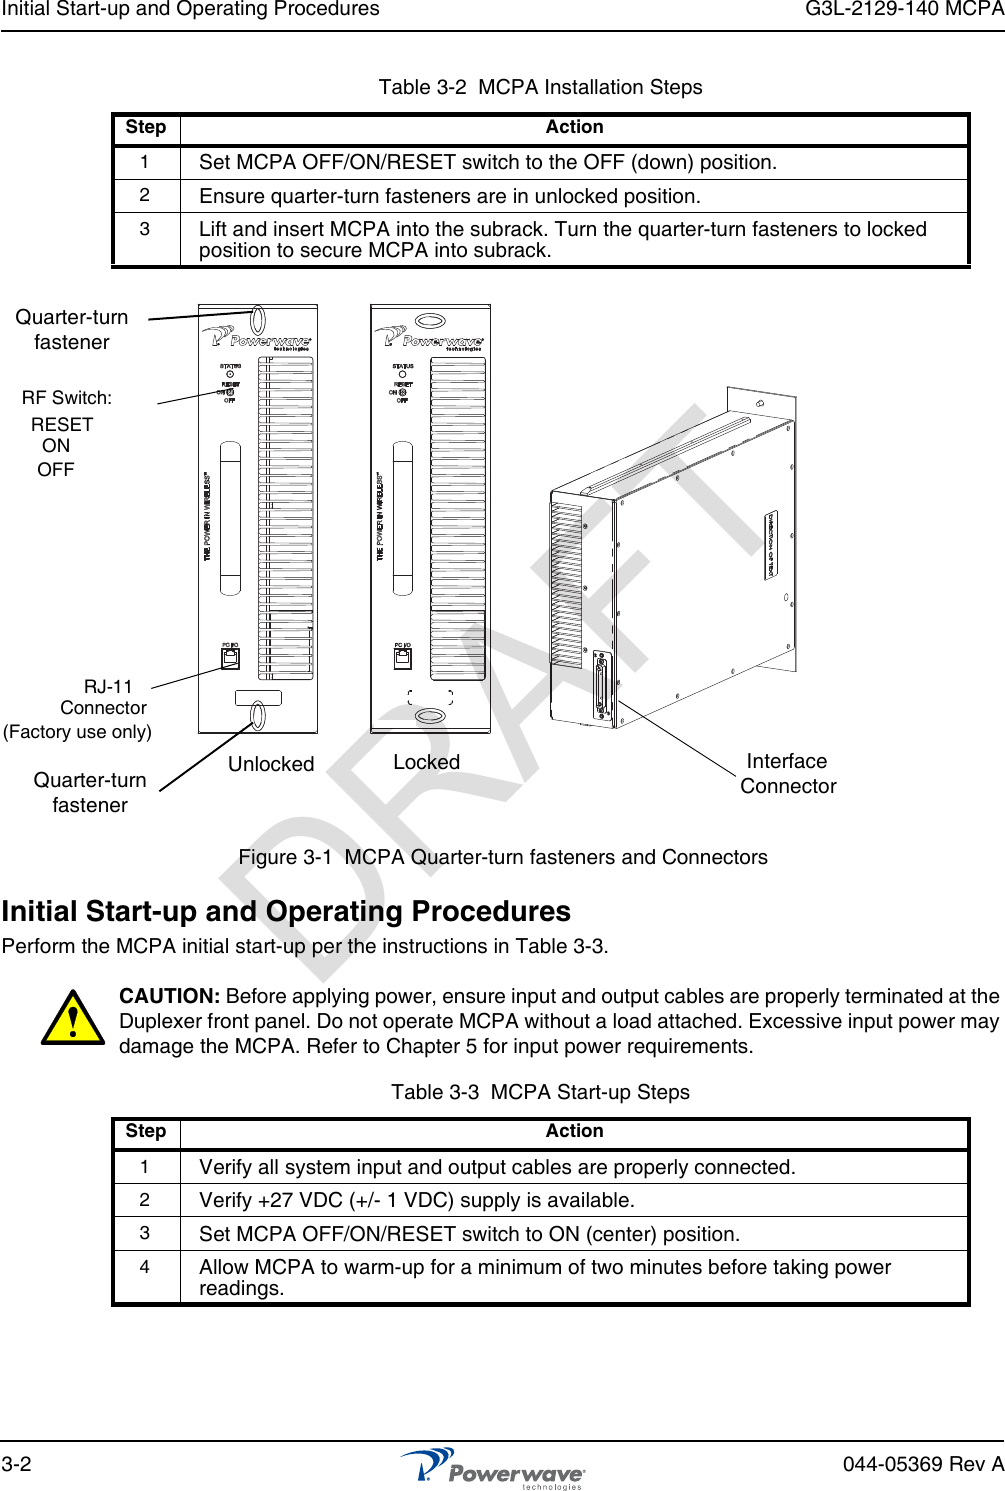 Initial Start-up and Operating Procedures G3L-2129-140 MCPA3-2 044-05369 Rev AFigure 3-1  MCPA Quarter-turn fasteners and ConnectorsInitial Start-up and Operating ProceduresPerform the MCPA initial start-up per the instructions in Table 3-3.CAUTION: Before applying power, ensure input and output cables are properly terminated at the Duplexer front panel. Do not operate MCPA without a load attached. Excessive input power may damage the MCPA. Refer to Chapter 5 for input power requirements.Table 3-2  MCPA Installation StepsStep Action1Set MCPA OFF/ON/RESET switch to the OFF (down) position.2Ensure quarter-turn fasteners are in unlocked position.3Lift and insert MCPA into the subrack. Turn the quarter-turn fasteners to locked position to secure MCPA into subrack.Table 3-3  MCPA Start-up StepsStep Action1Verify all system input and output cables are properly connected.2Verify +27 VDC (+/- 1 VDC) supply is available.3Set MCPA OFF/ON/RESET switch to ON (center) position.4Allow MCPA to warm-up for a minimum of two minutes before taking power readings.RF Switch:RJ-11Connector(Factory use only)Quarter-turnfastenerRESETONOFFQuarter-turnfastenerInterfaceConnectorUnlocked LockedDRAFT